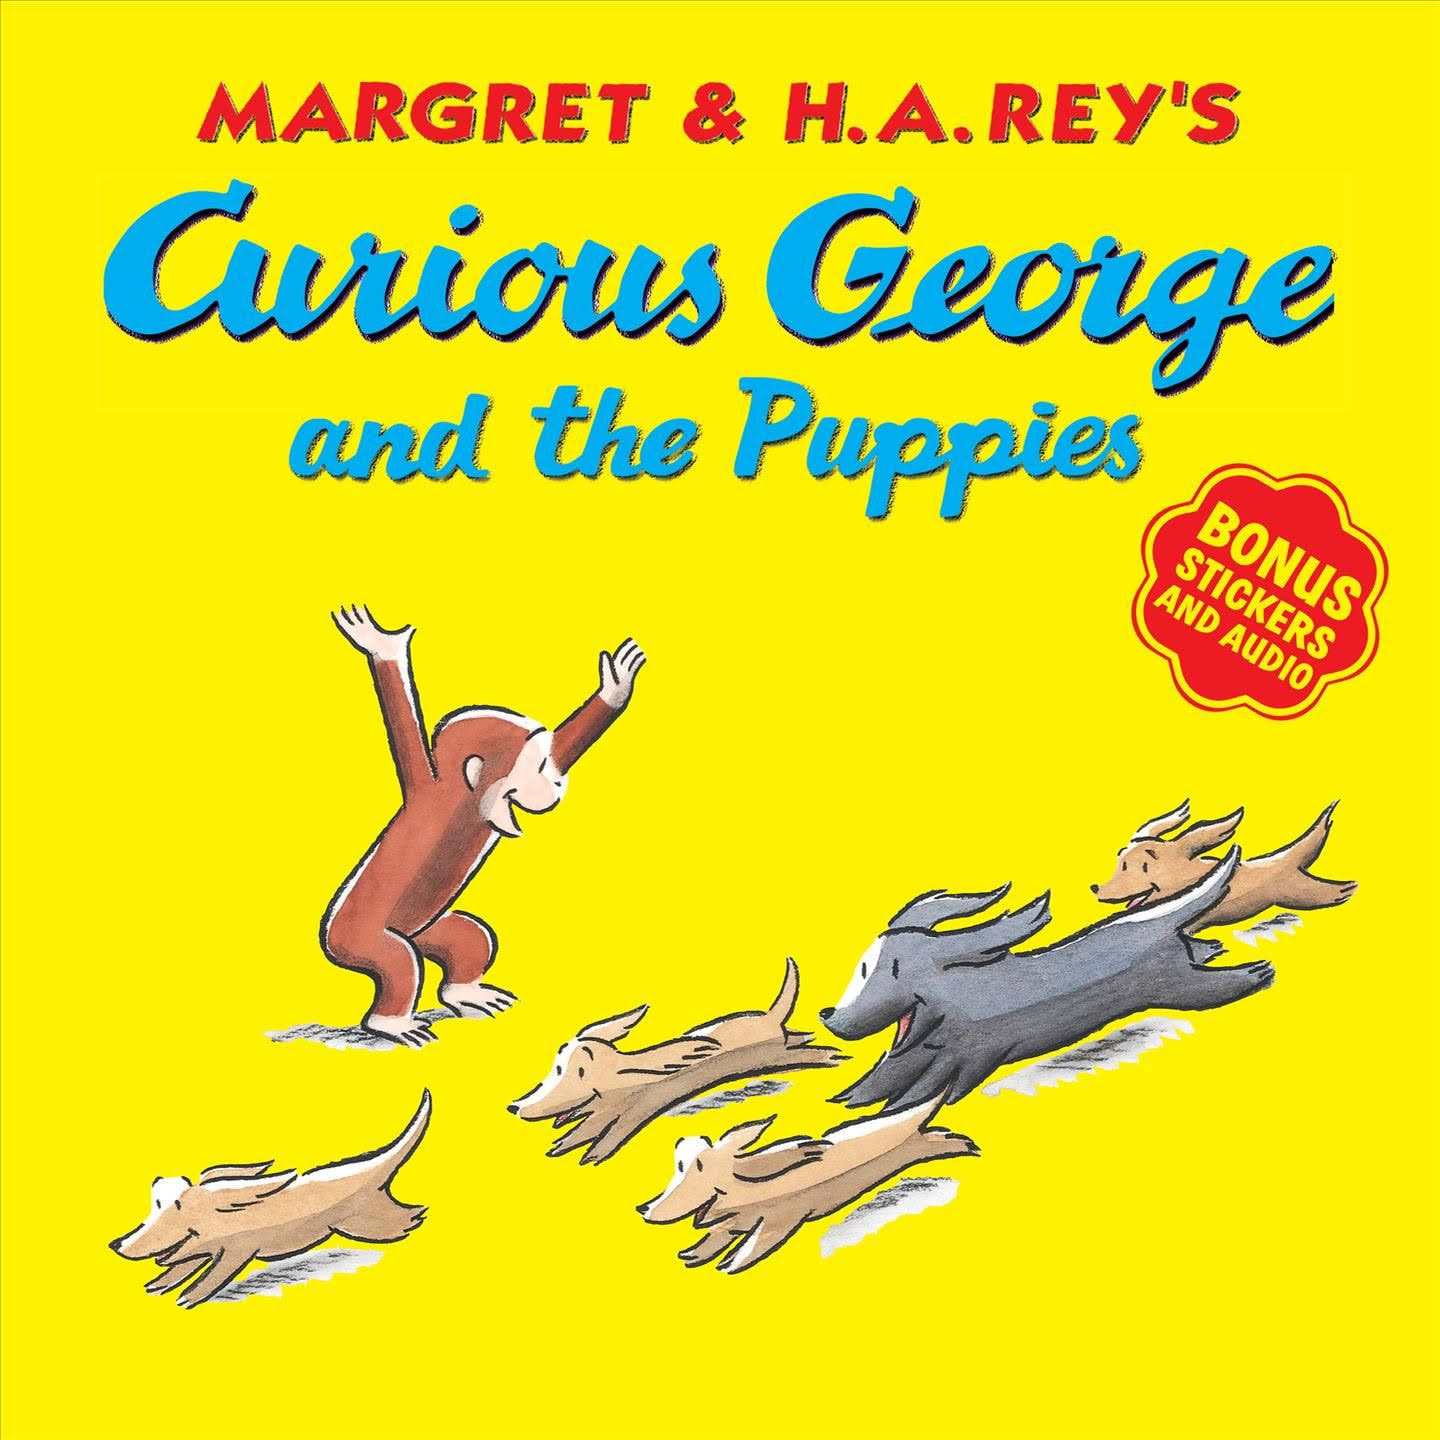 Curious George and the Puppies (with Bonus Stickers and Audio) [Book]